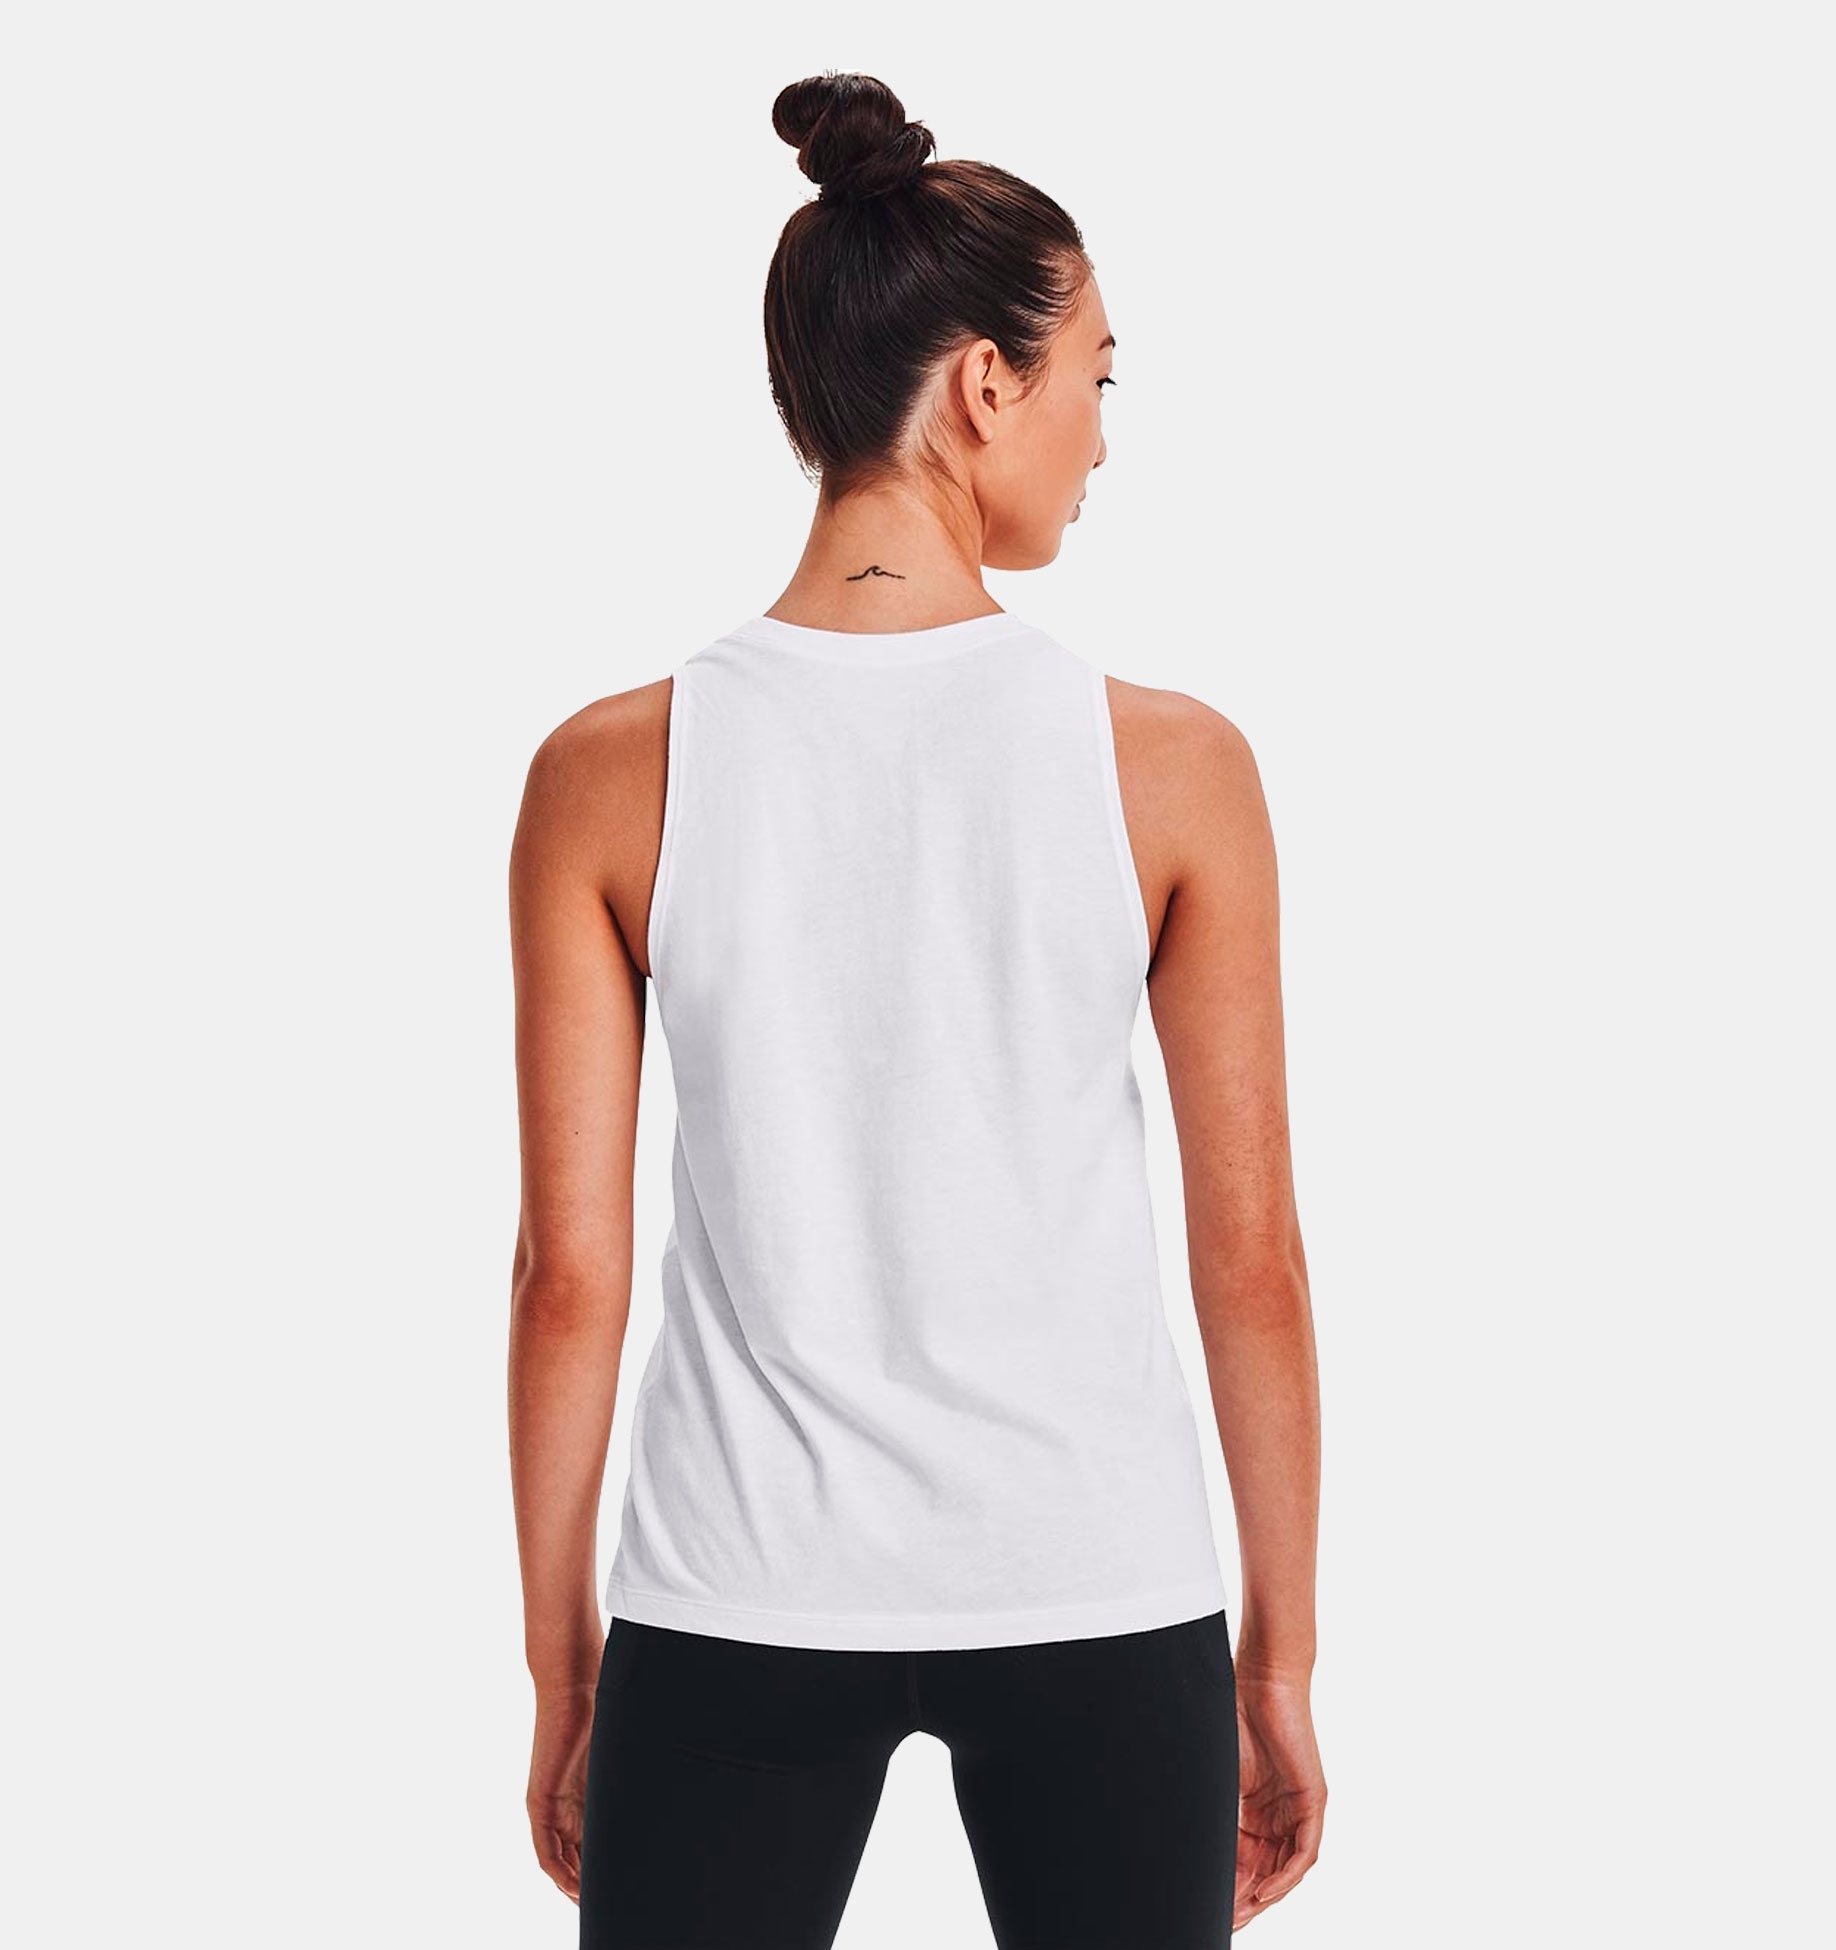 LIVE GP MUSCLE TANK ARG-WHT,LG image number 1